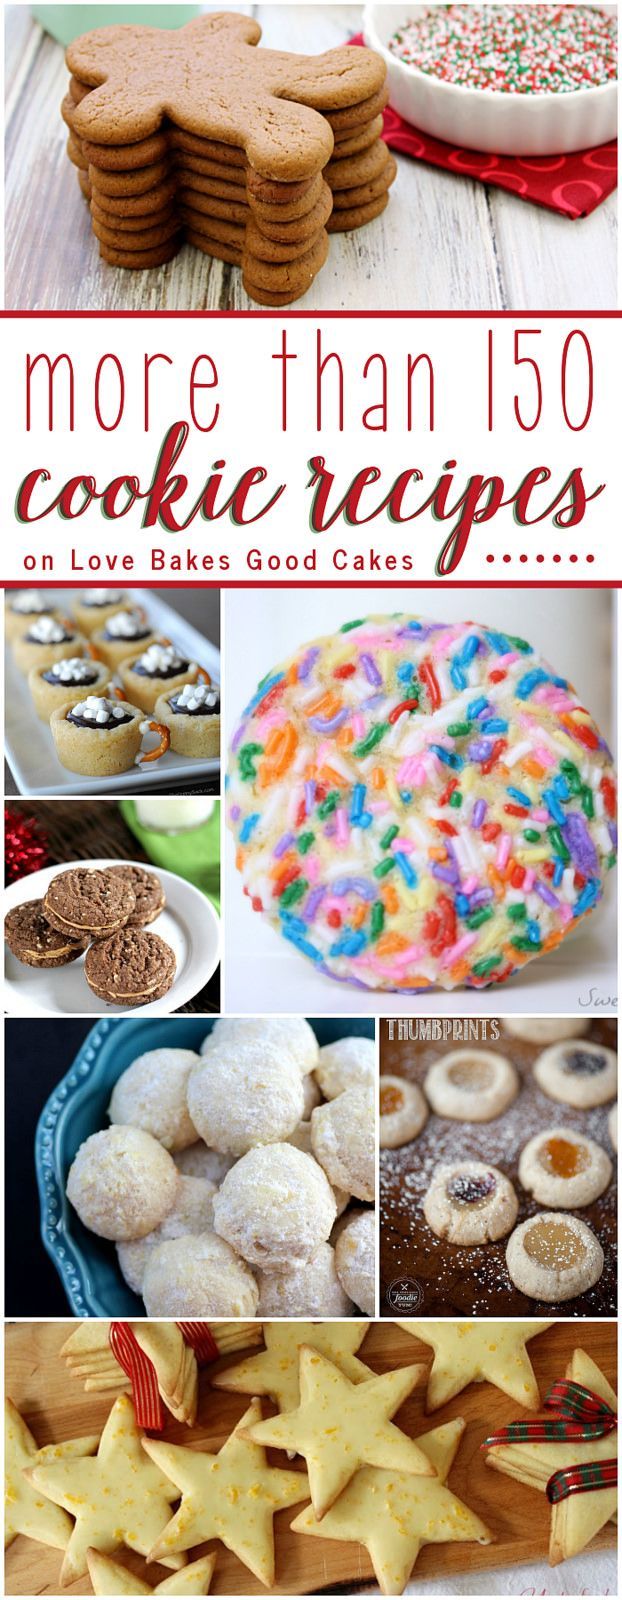 More than 150 Cookie Recipes on Love Bakes Good Cakes